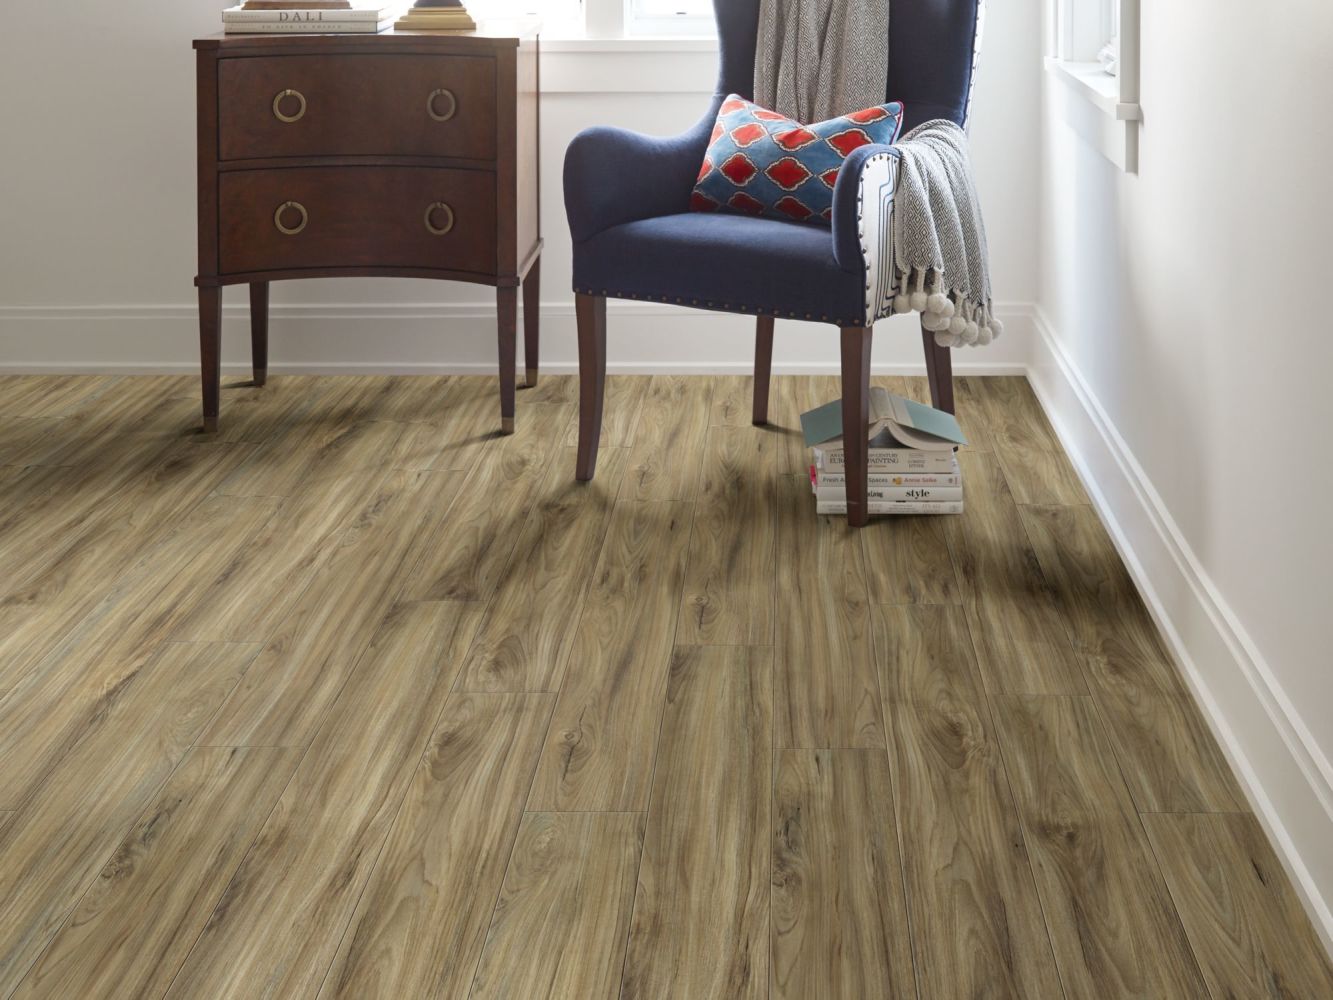 Shaw Floors Resilient Property Solutions Presto Plus Whispering Wood 00405_VE284